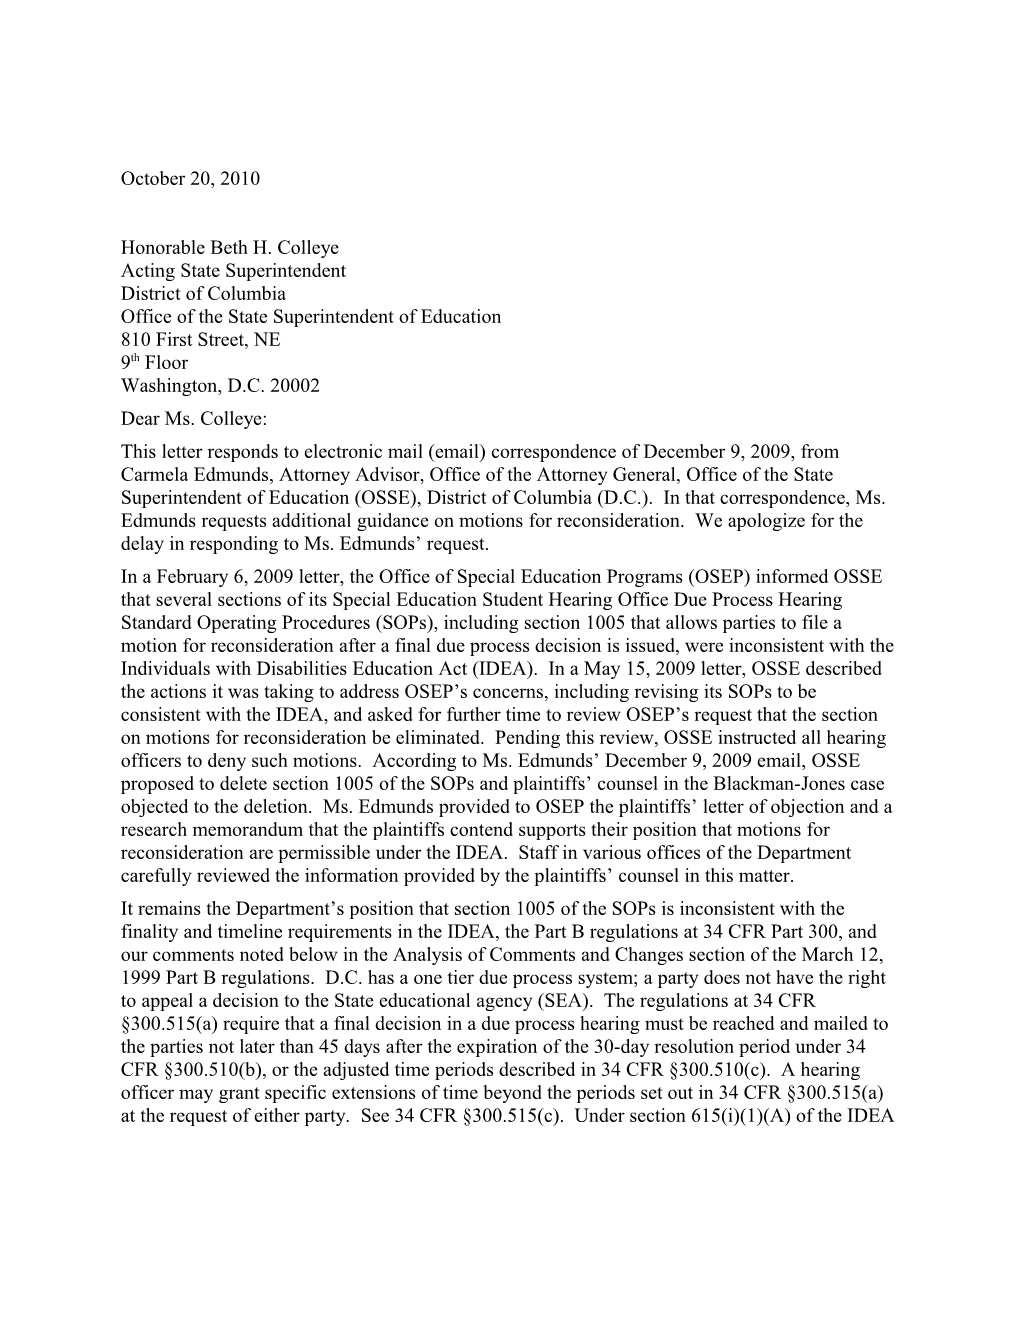 Colleye Letter Dated 10/20/10 Re: Finality of Due Process Hearing Decisions (Ms Word)